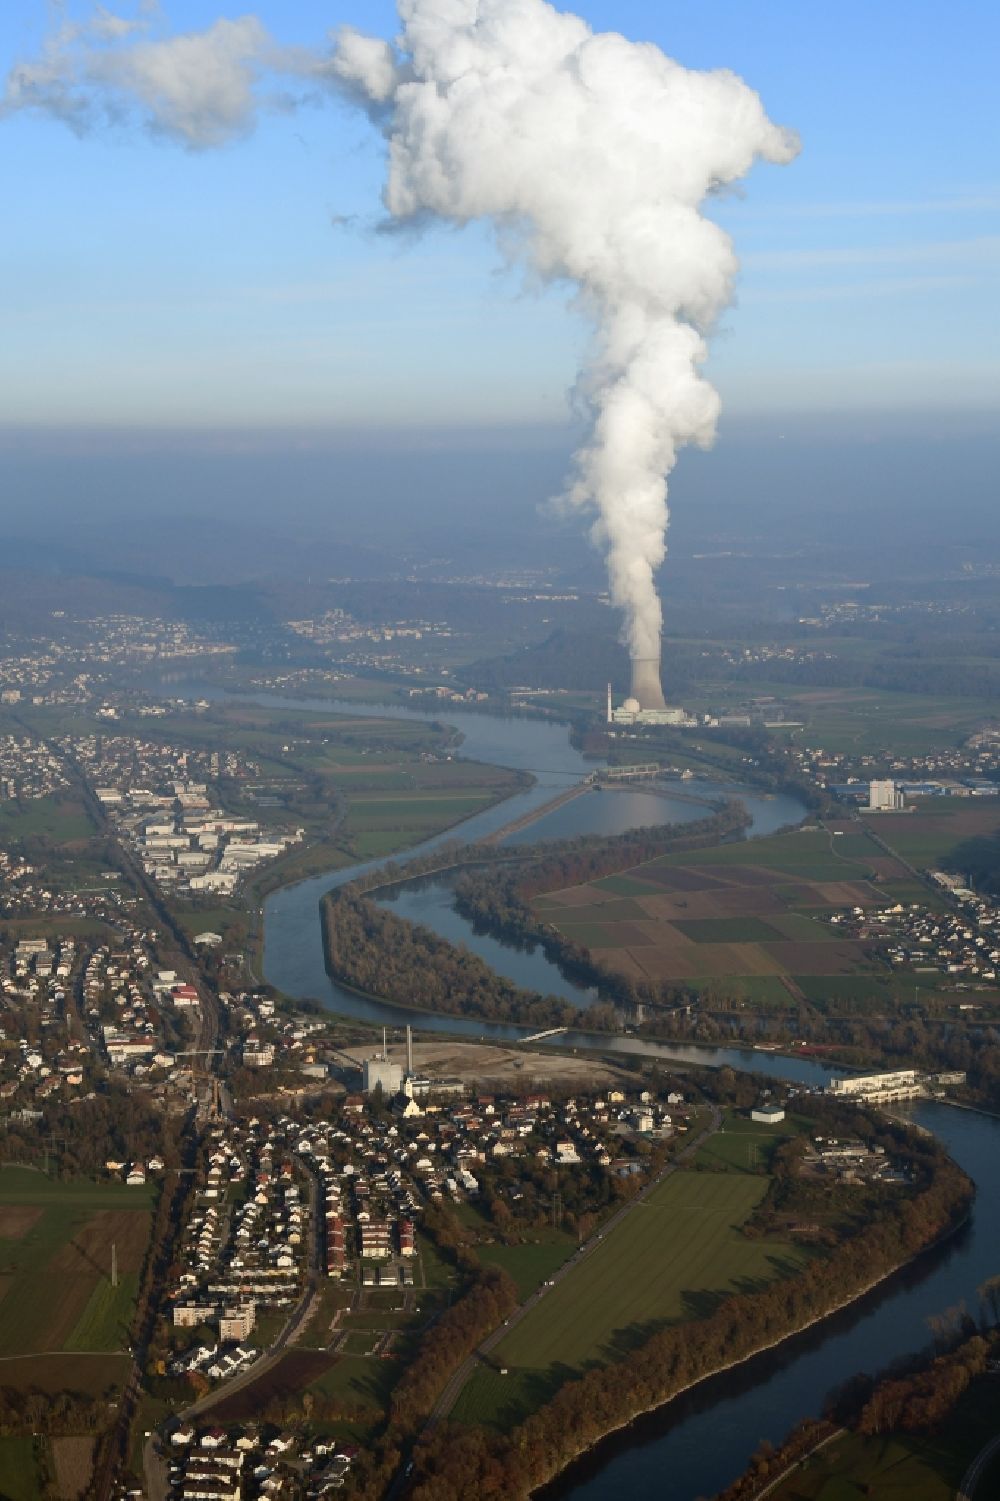 Albbruck from the bird's eye view: Village on the banks of the Rhine - river in Albbruck in the state Baden-Wurttemberg, Germany. Steam column of the nuclear power station KKL Leibstadt in Switzerland